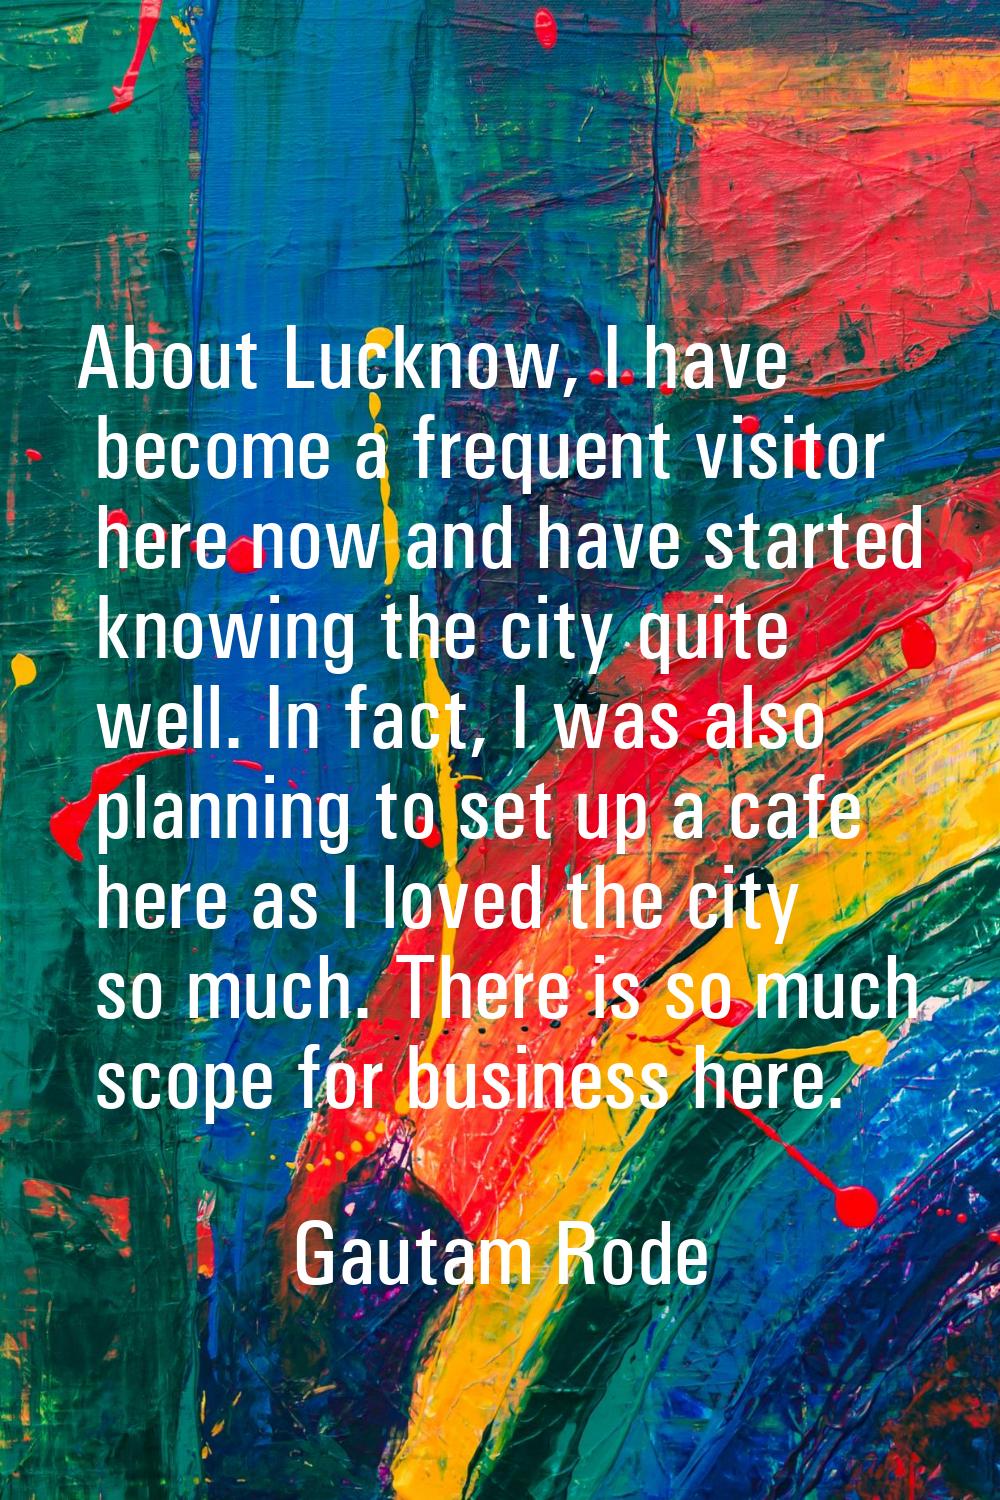 About Lucknow, I have become a frequent visitor here now and have started knowing the city quite we